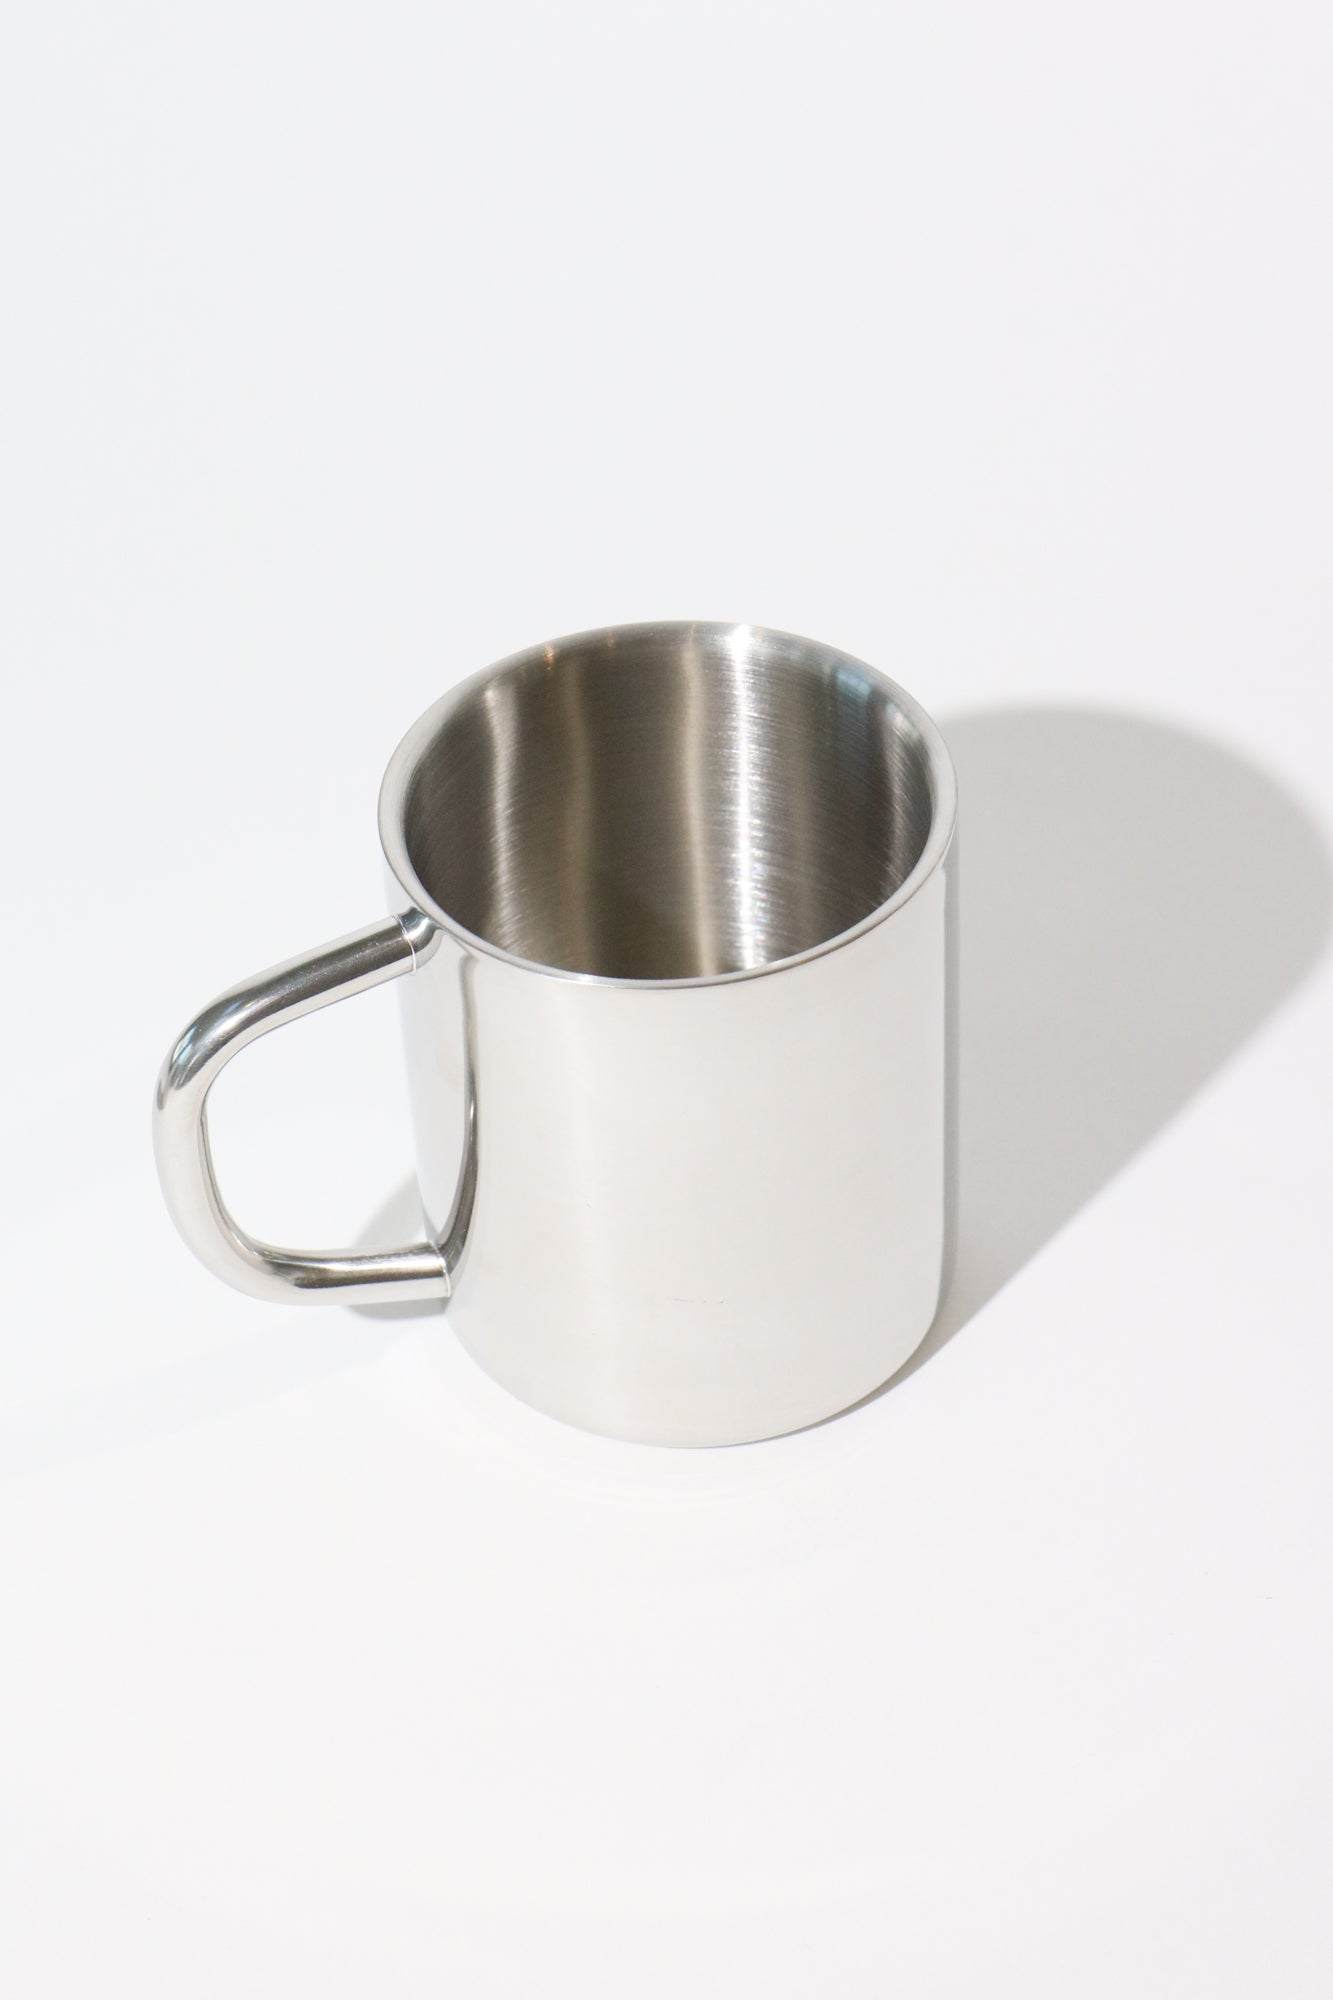 Shop 2 Stainless Sommer Set Steel of Mug, Projects | Service